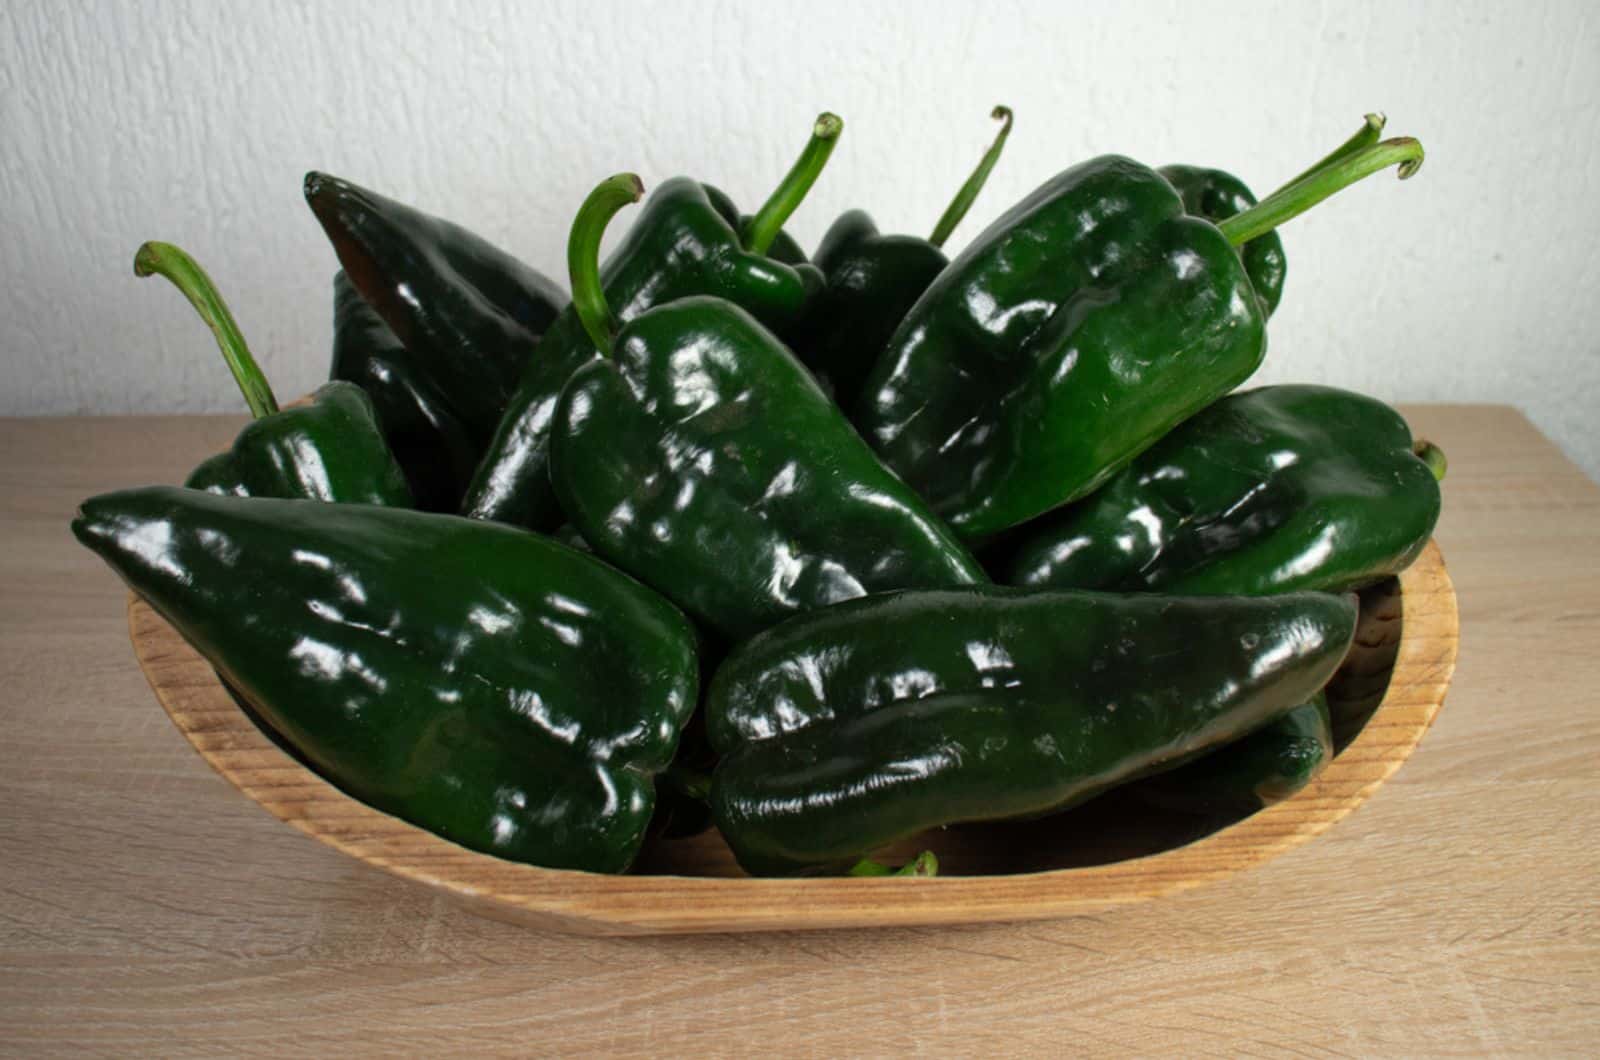 Poblano Pepper's on a wooden basket